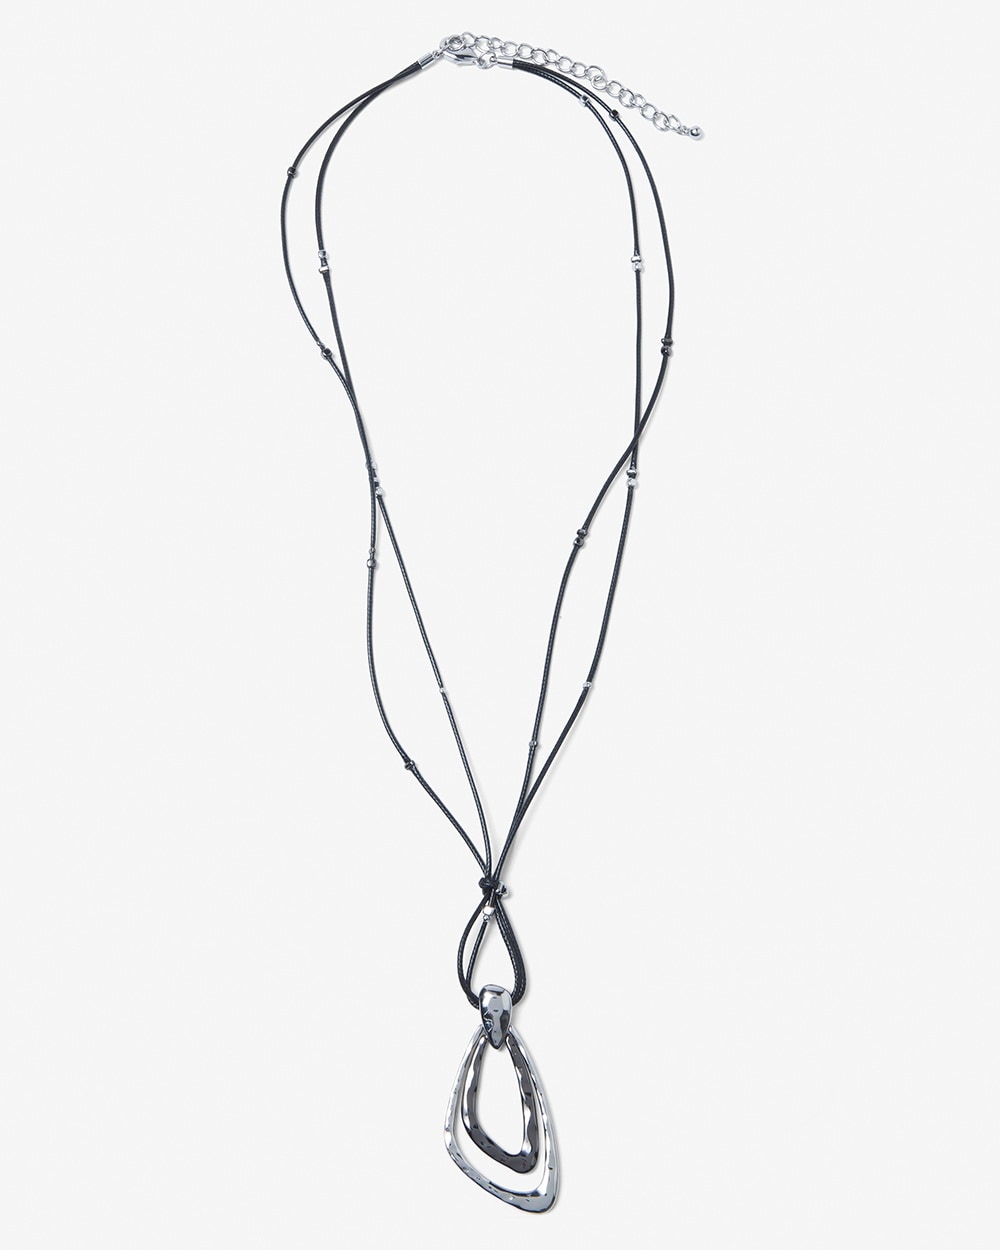 Angled Pendant Faux-Leather Necklace